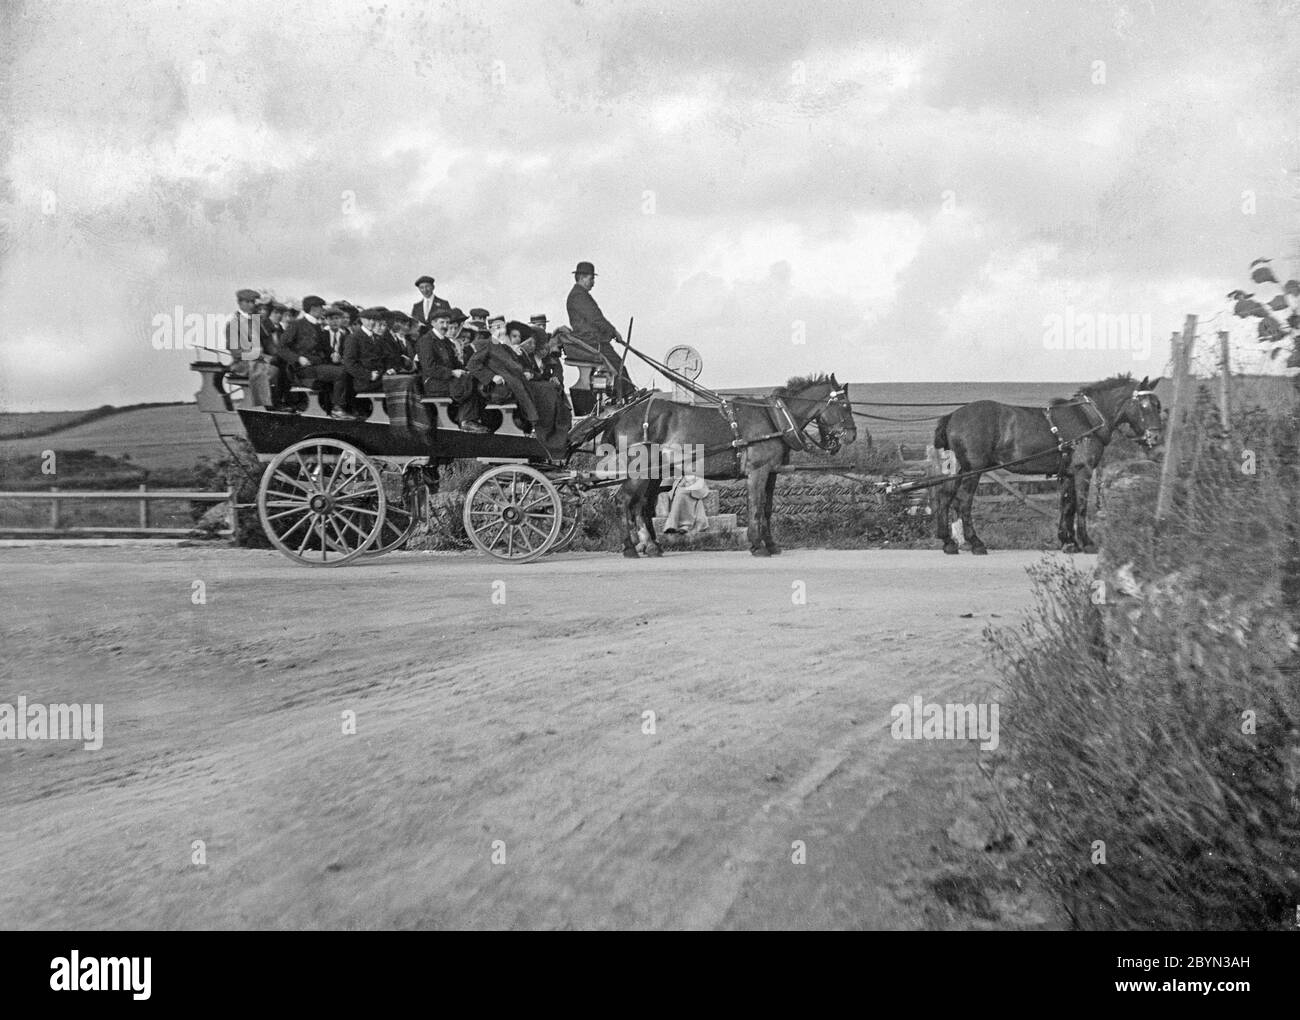 A late Victorian English vintage black and white photograph showing horses pulling a large cart with people in. This was known as a charabanc or charabang. Stock Photo